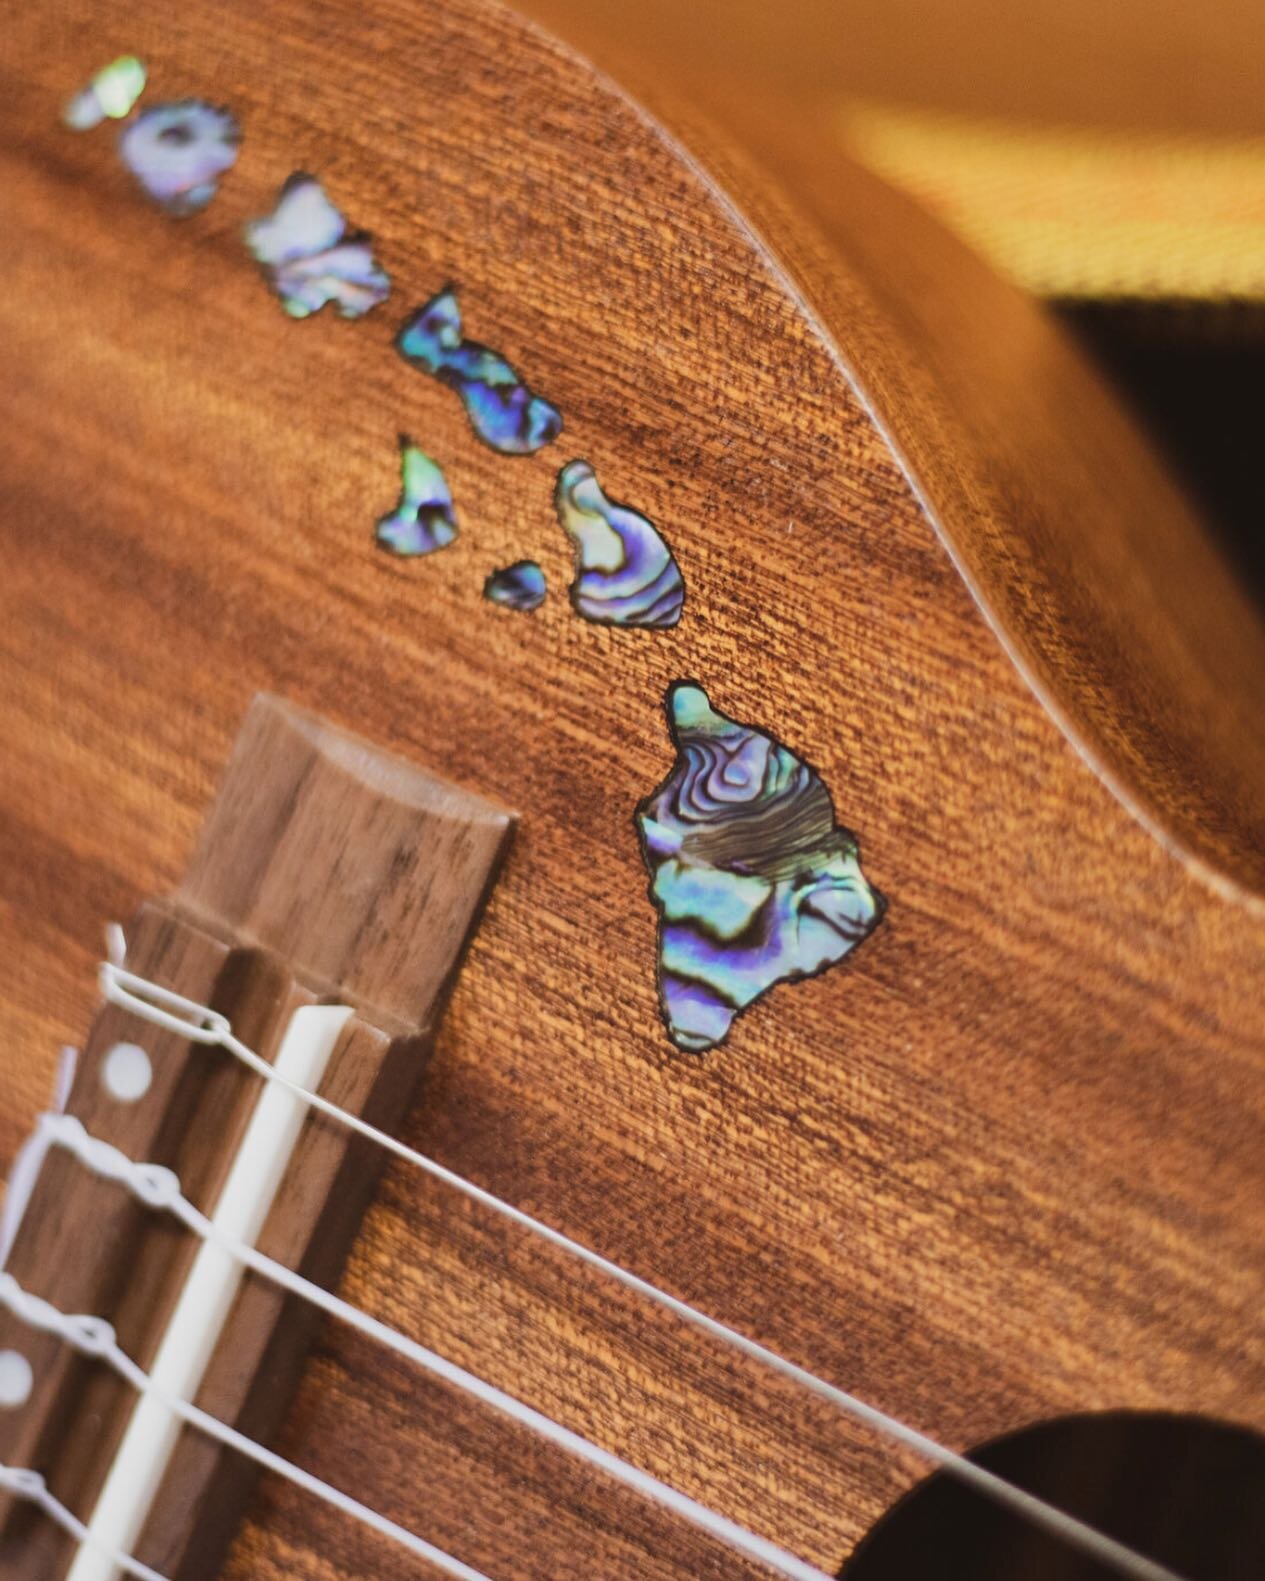 The Hawaiian Islands Starter Ukulele is one of our favorites! It&rsquo;s the perfect ukulele for a beginner player and comes in soprano, concert, and tenor sizes. What are you waiting for? Start playing today! 🎶 #LuckyWeLiveHawaii #HawaiiVibes #Hawa